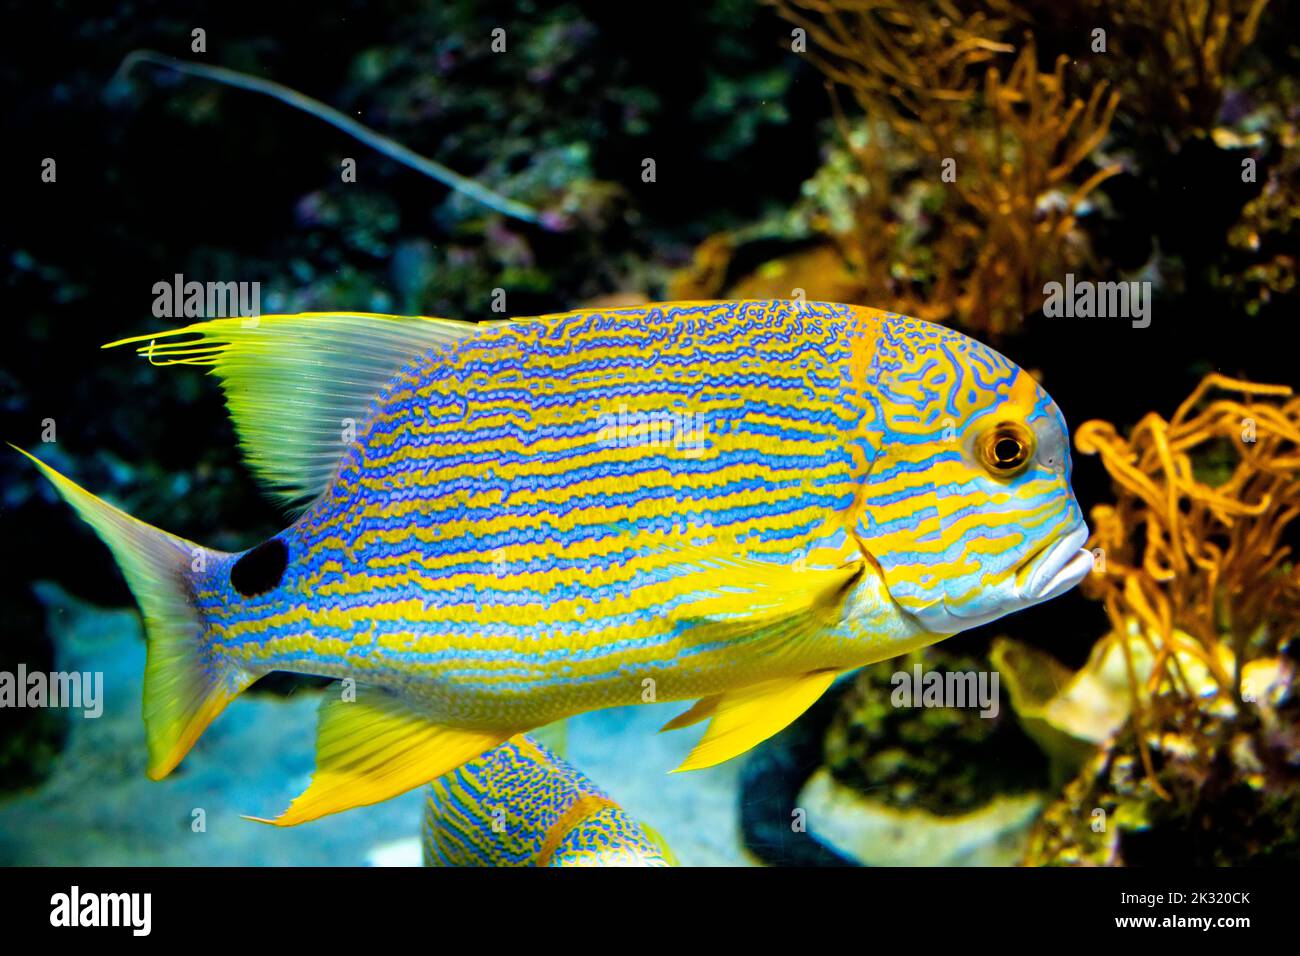 The sailfin snapper (Symphorichthys spilurus) is a species of marine ray-finned fish.  It is native to the Indo-Pacific region. Stock Photo